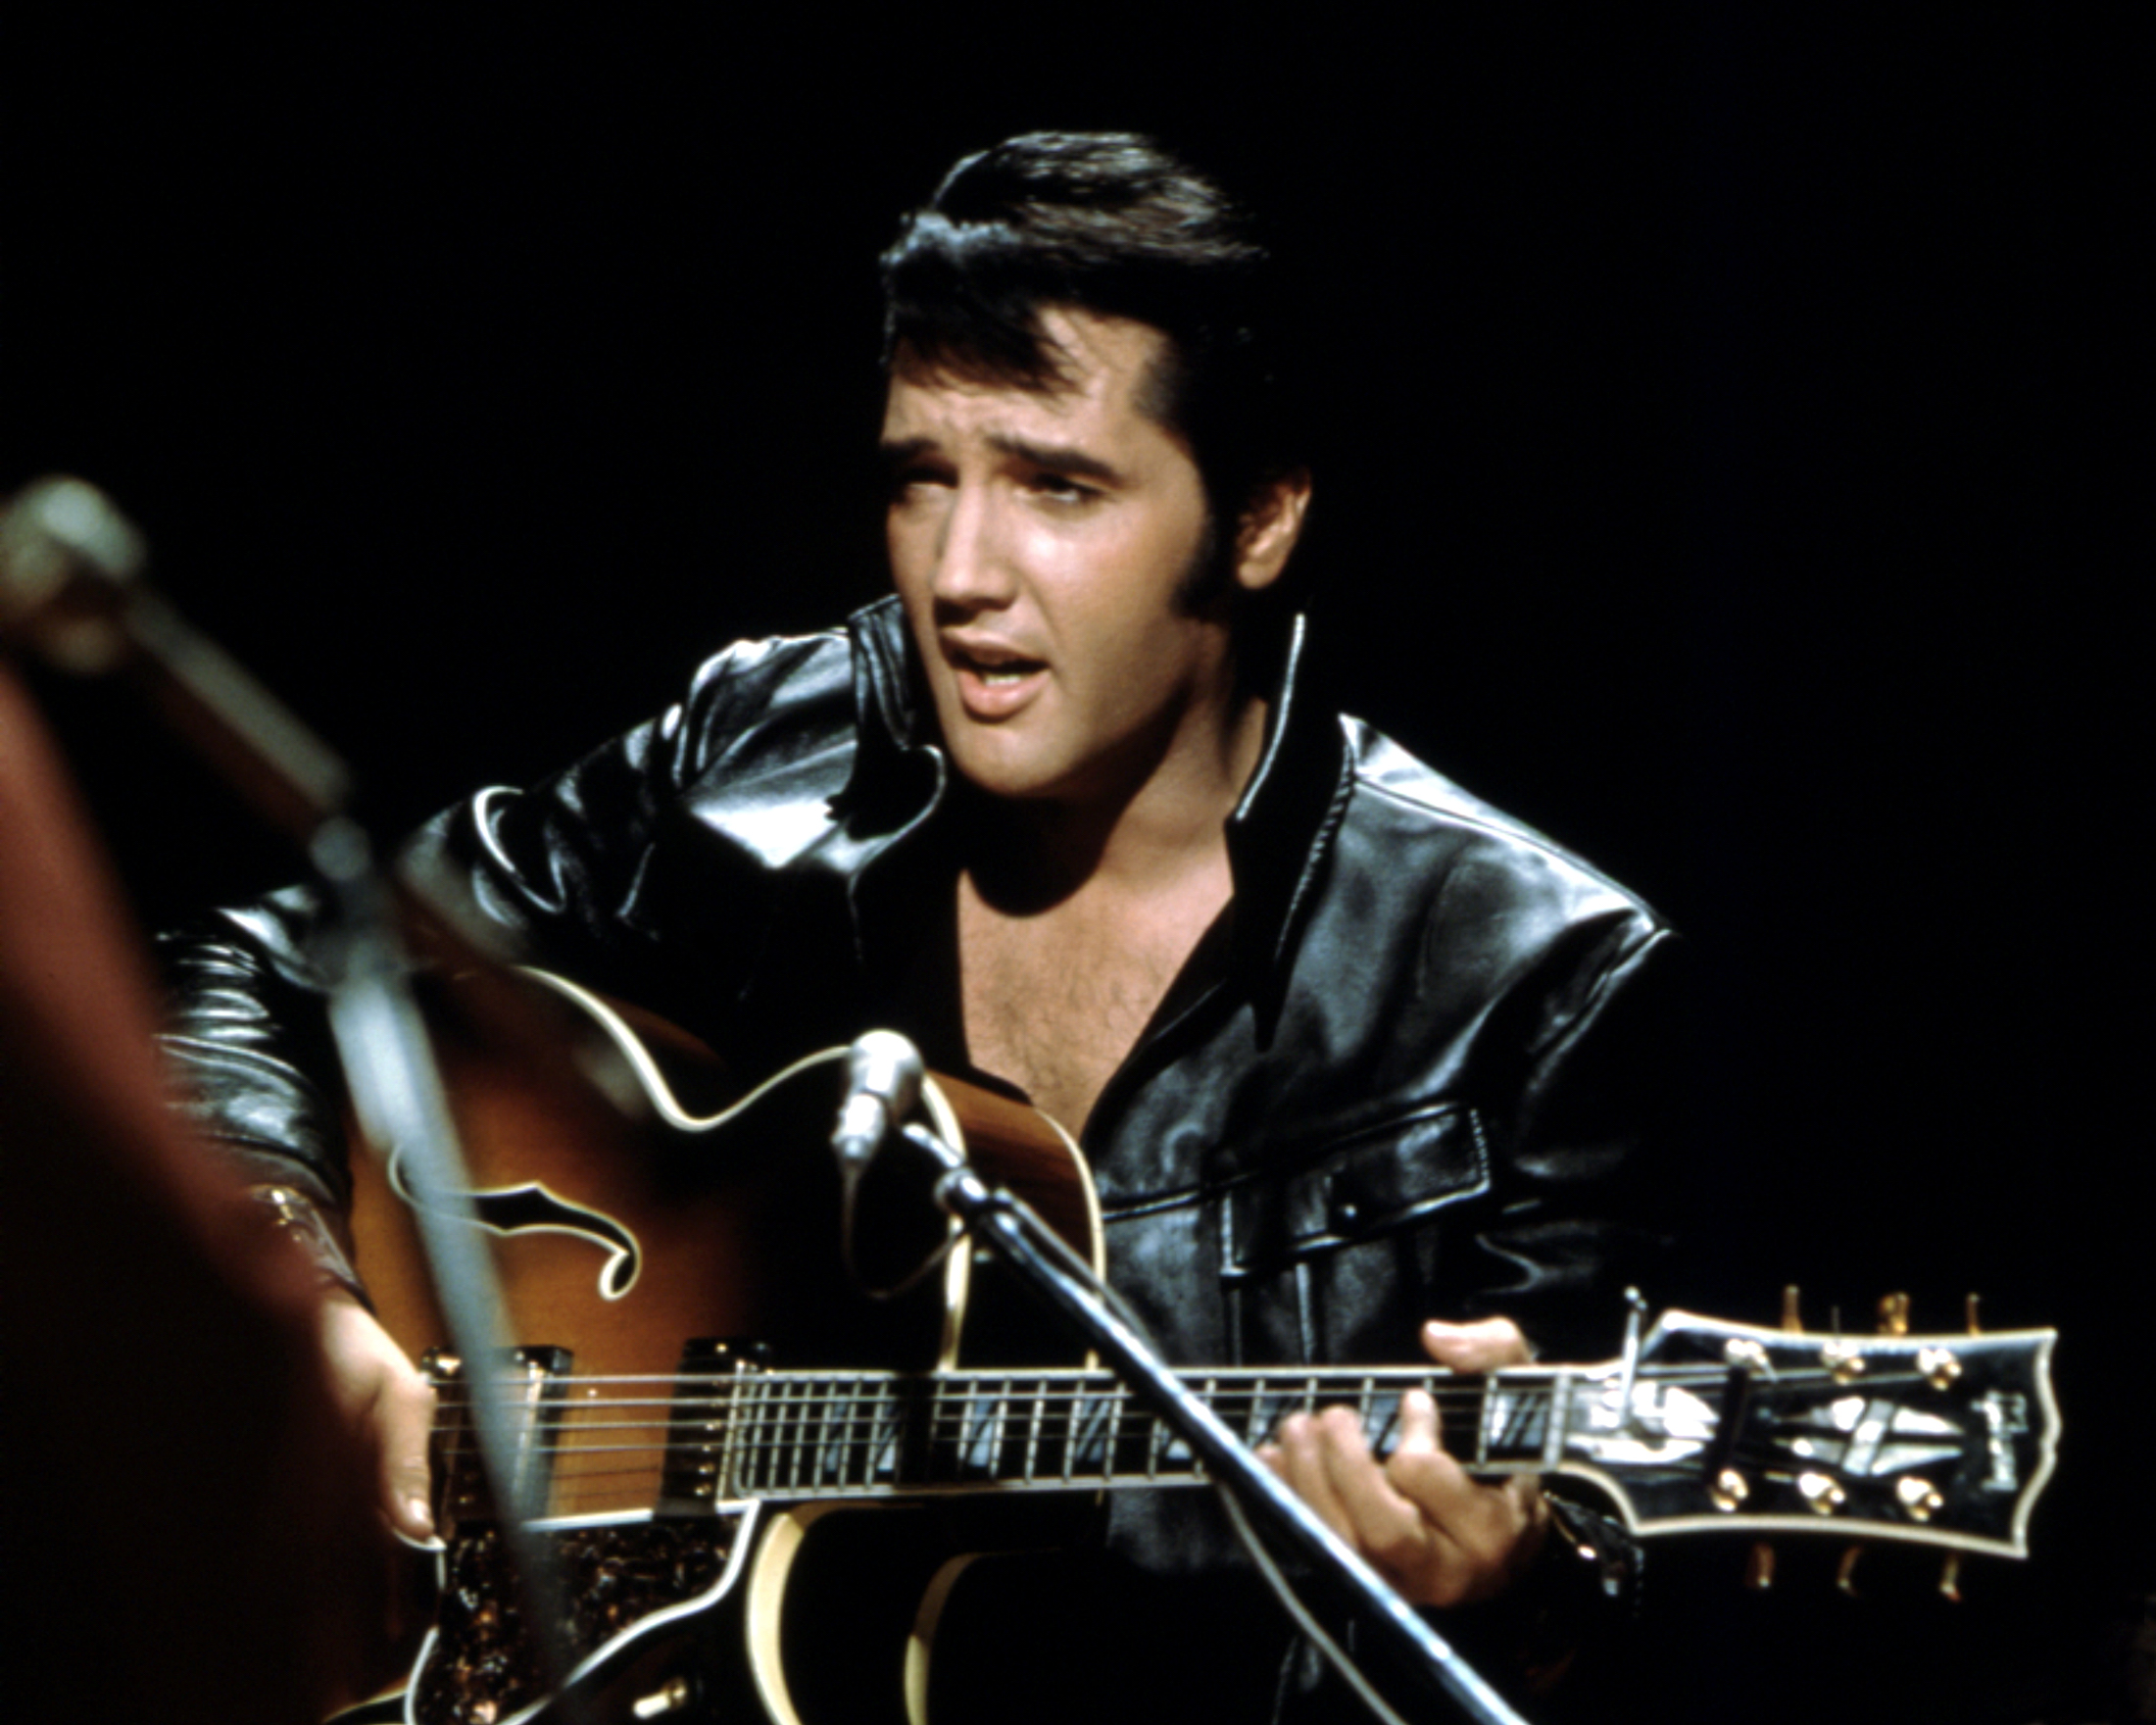 Elvis Presley perfroming on his comeback TV special in 1968